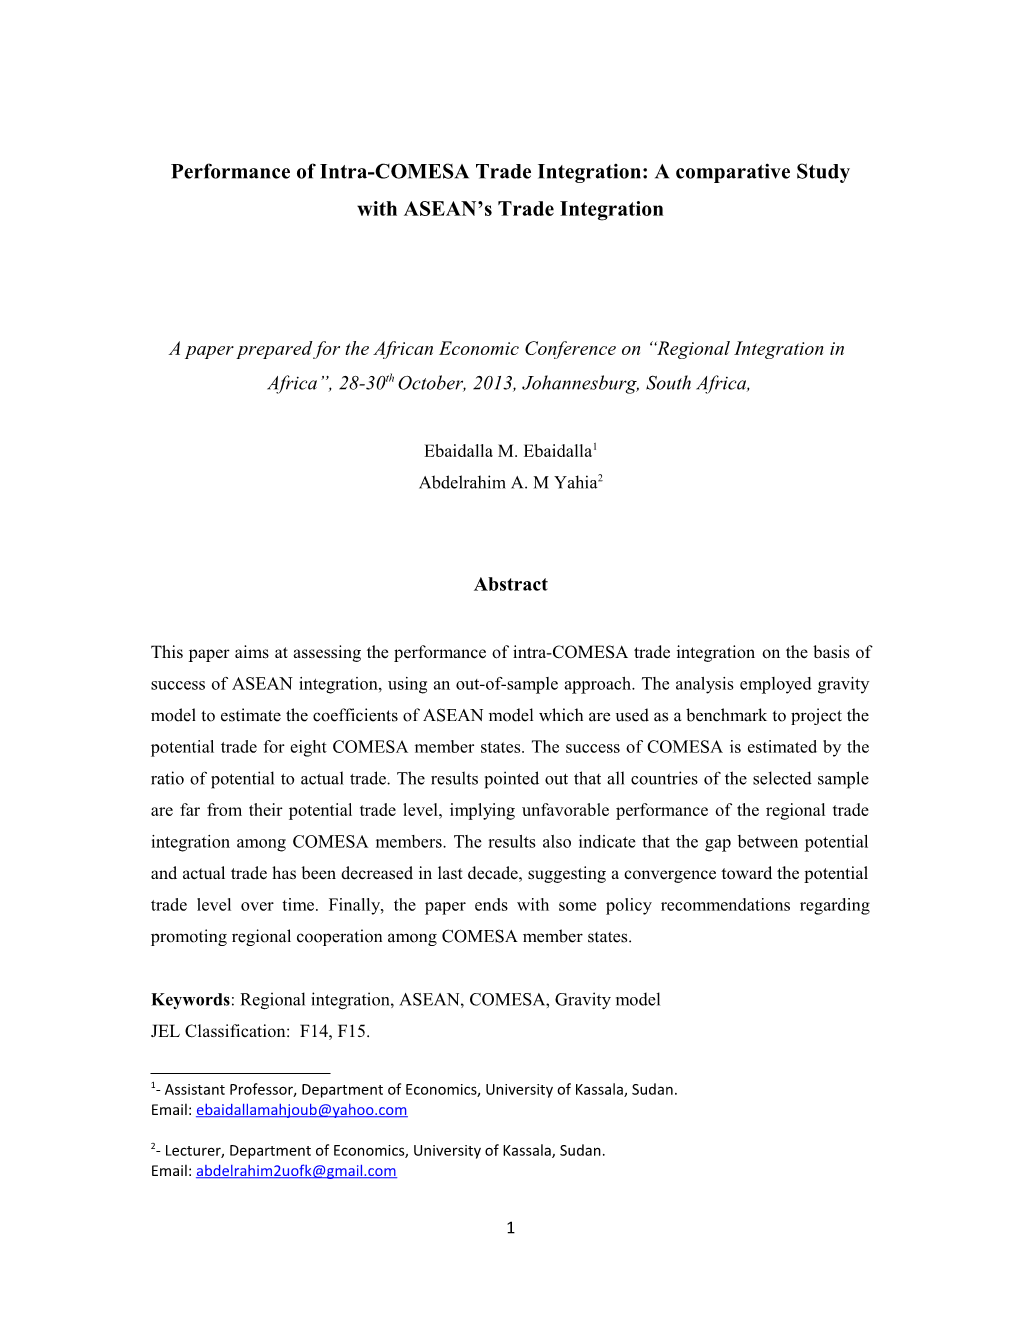 Performance of Intra-COMESA Trade Integration: a Comparative Study with ASEAN S Trade